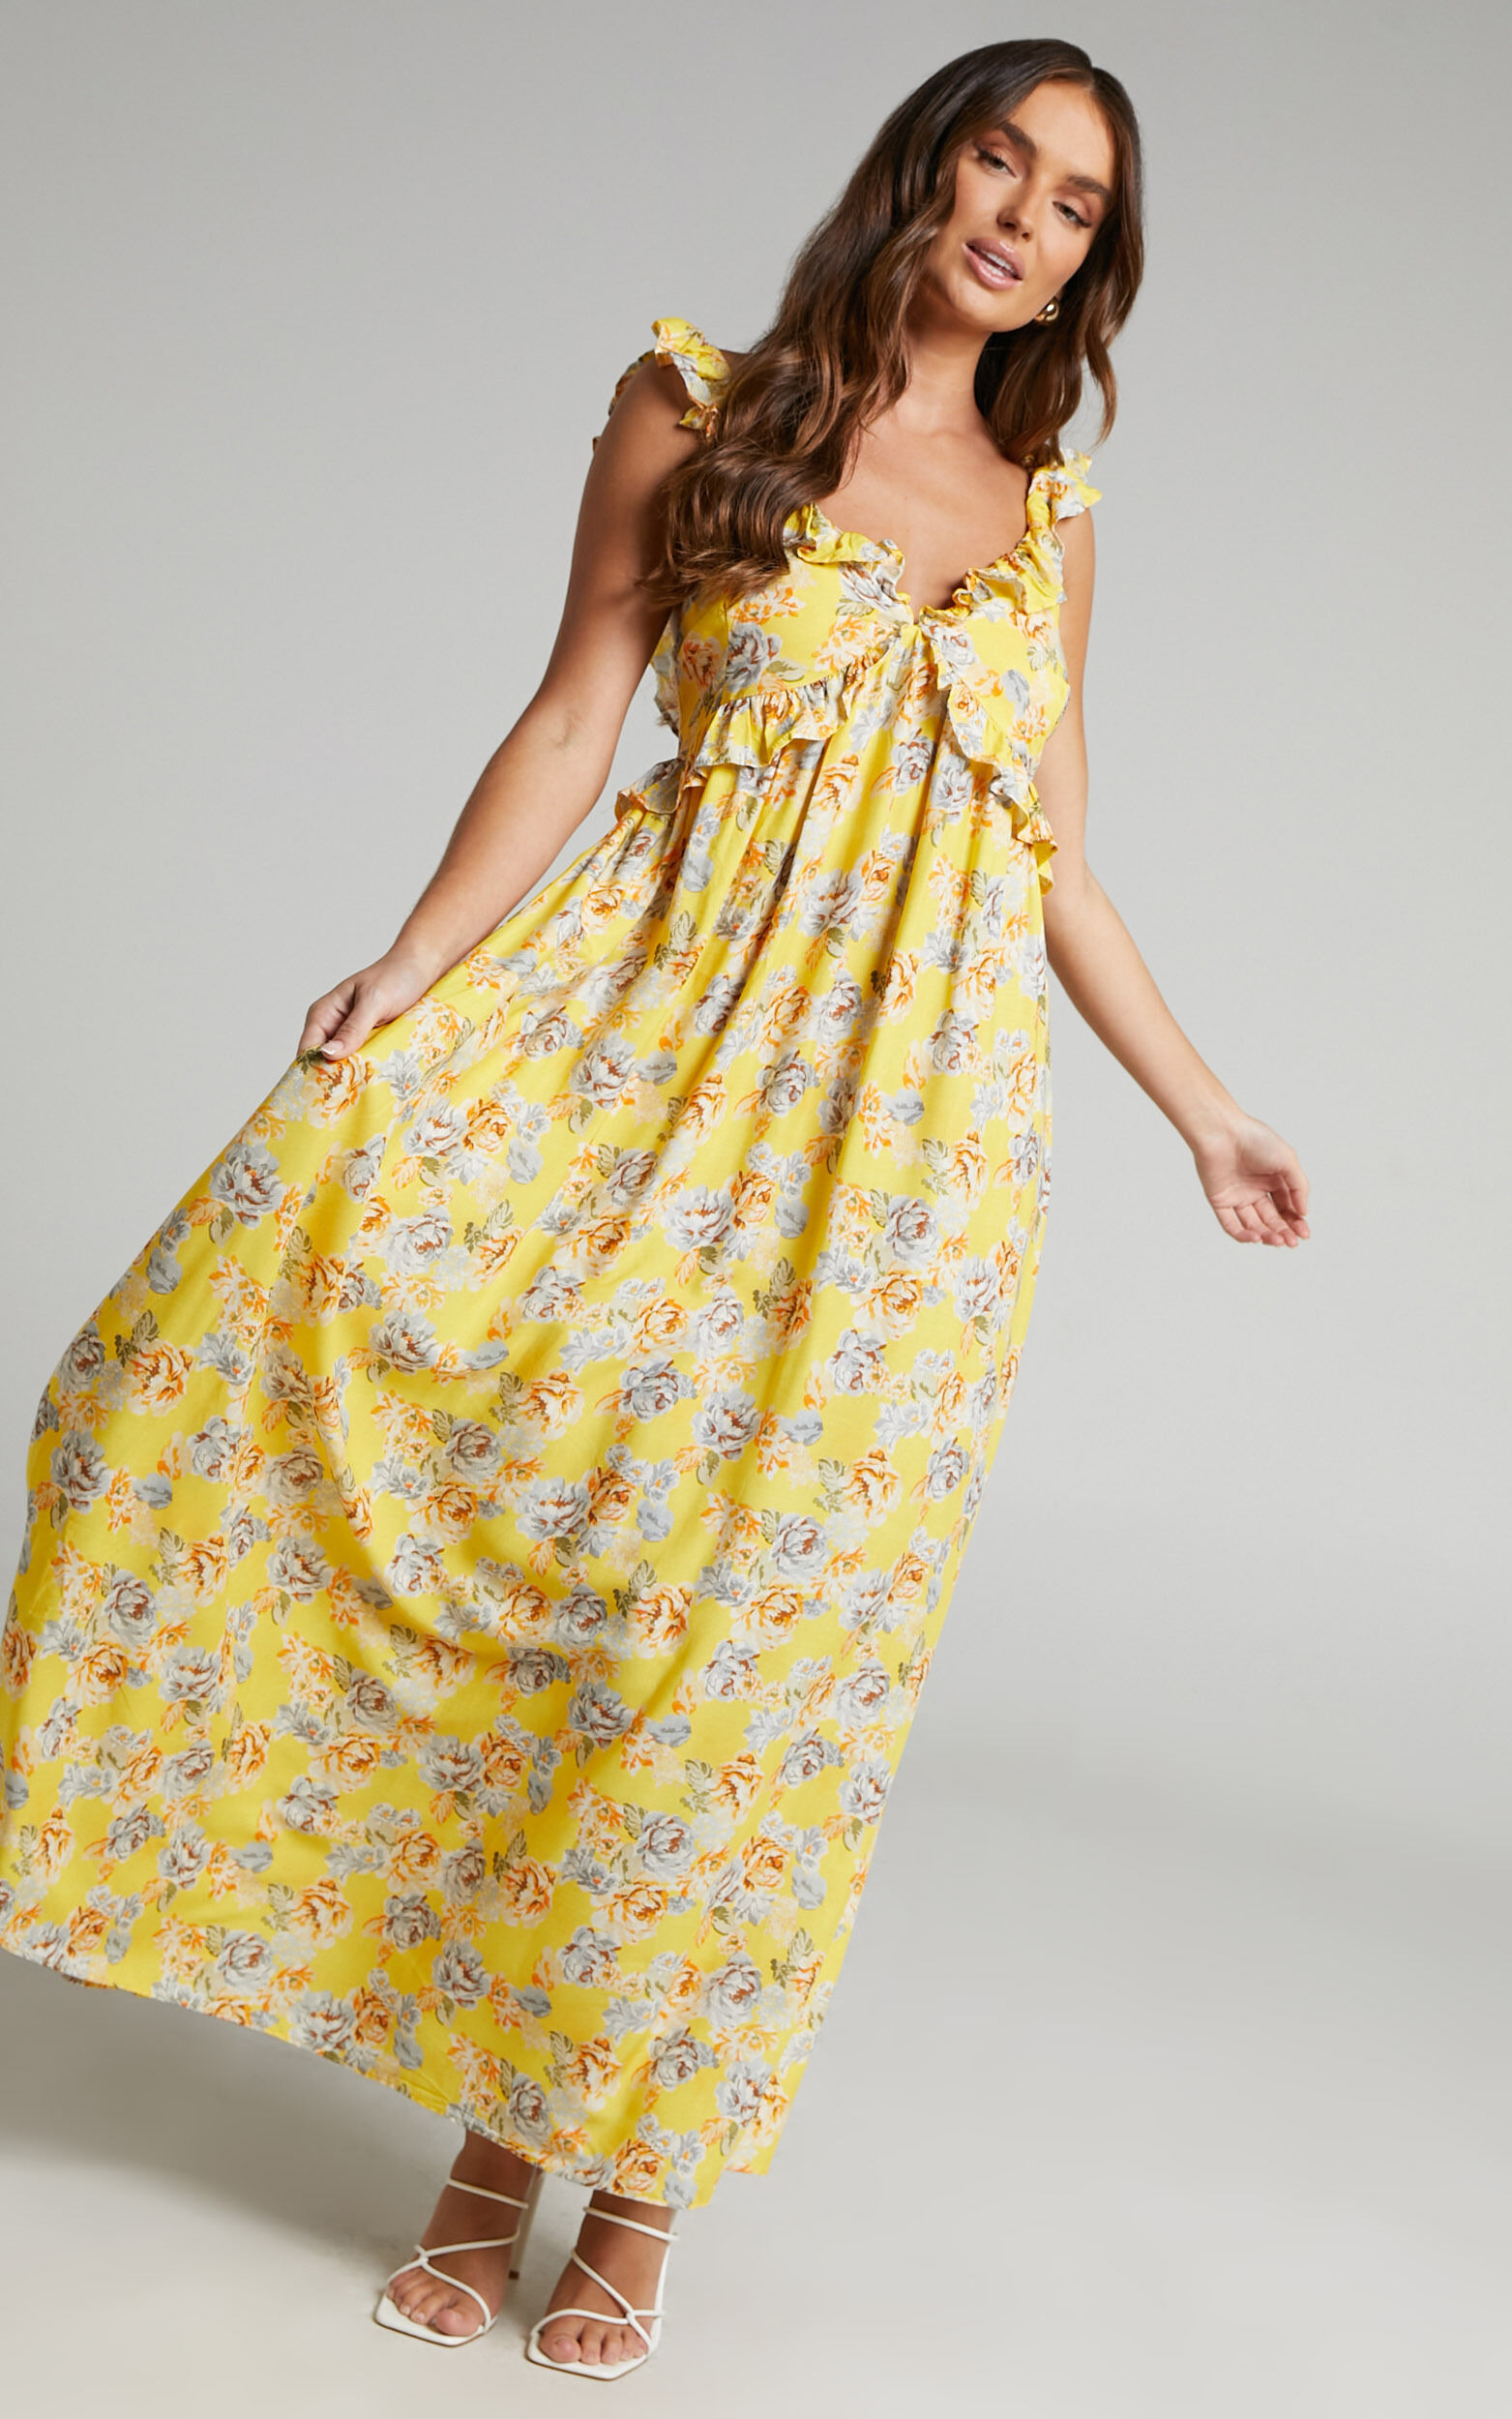 Serenyo Ruffle Detail Low Back Maxi Dress in Yellow Floral - 06, YEL1, super-hi-res image number null